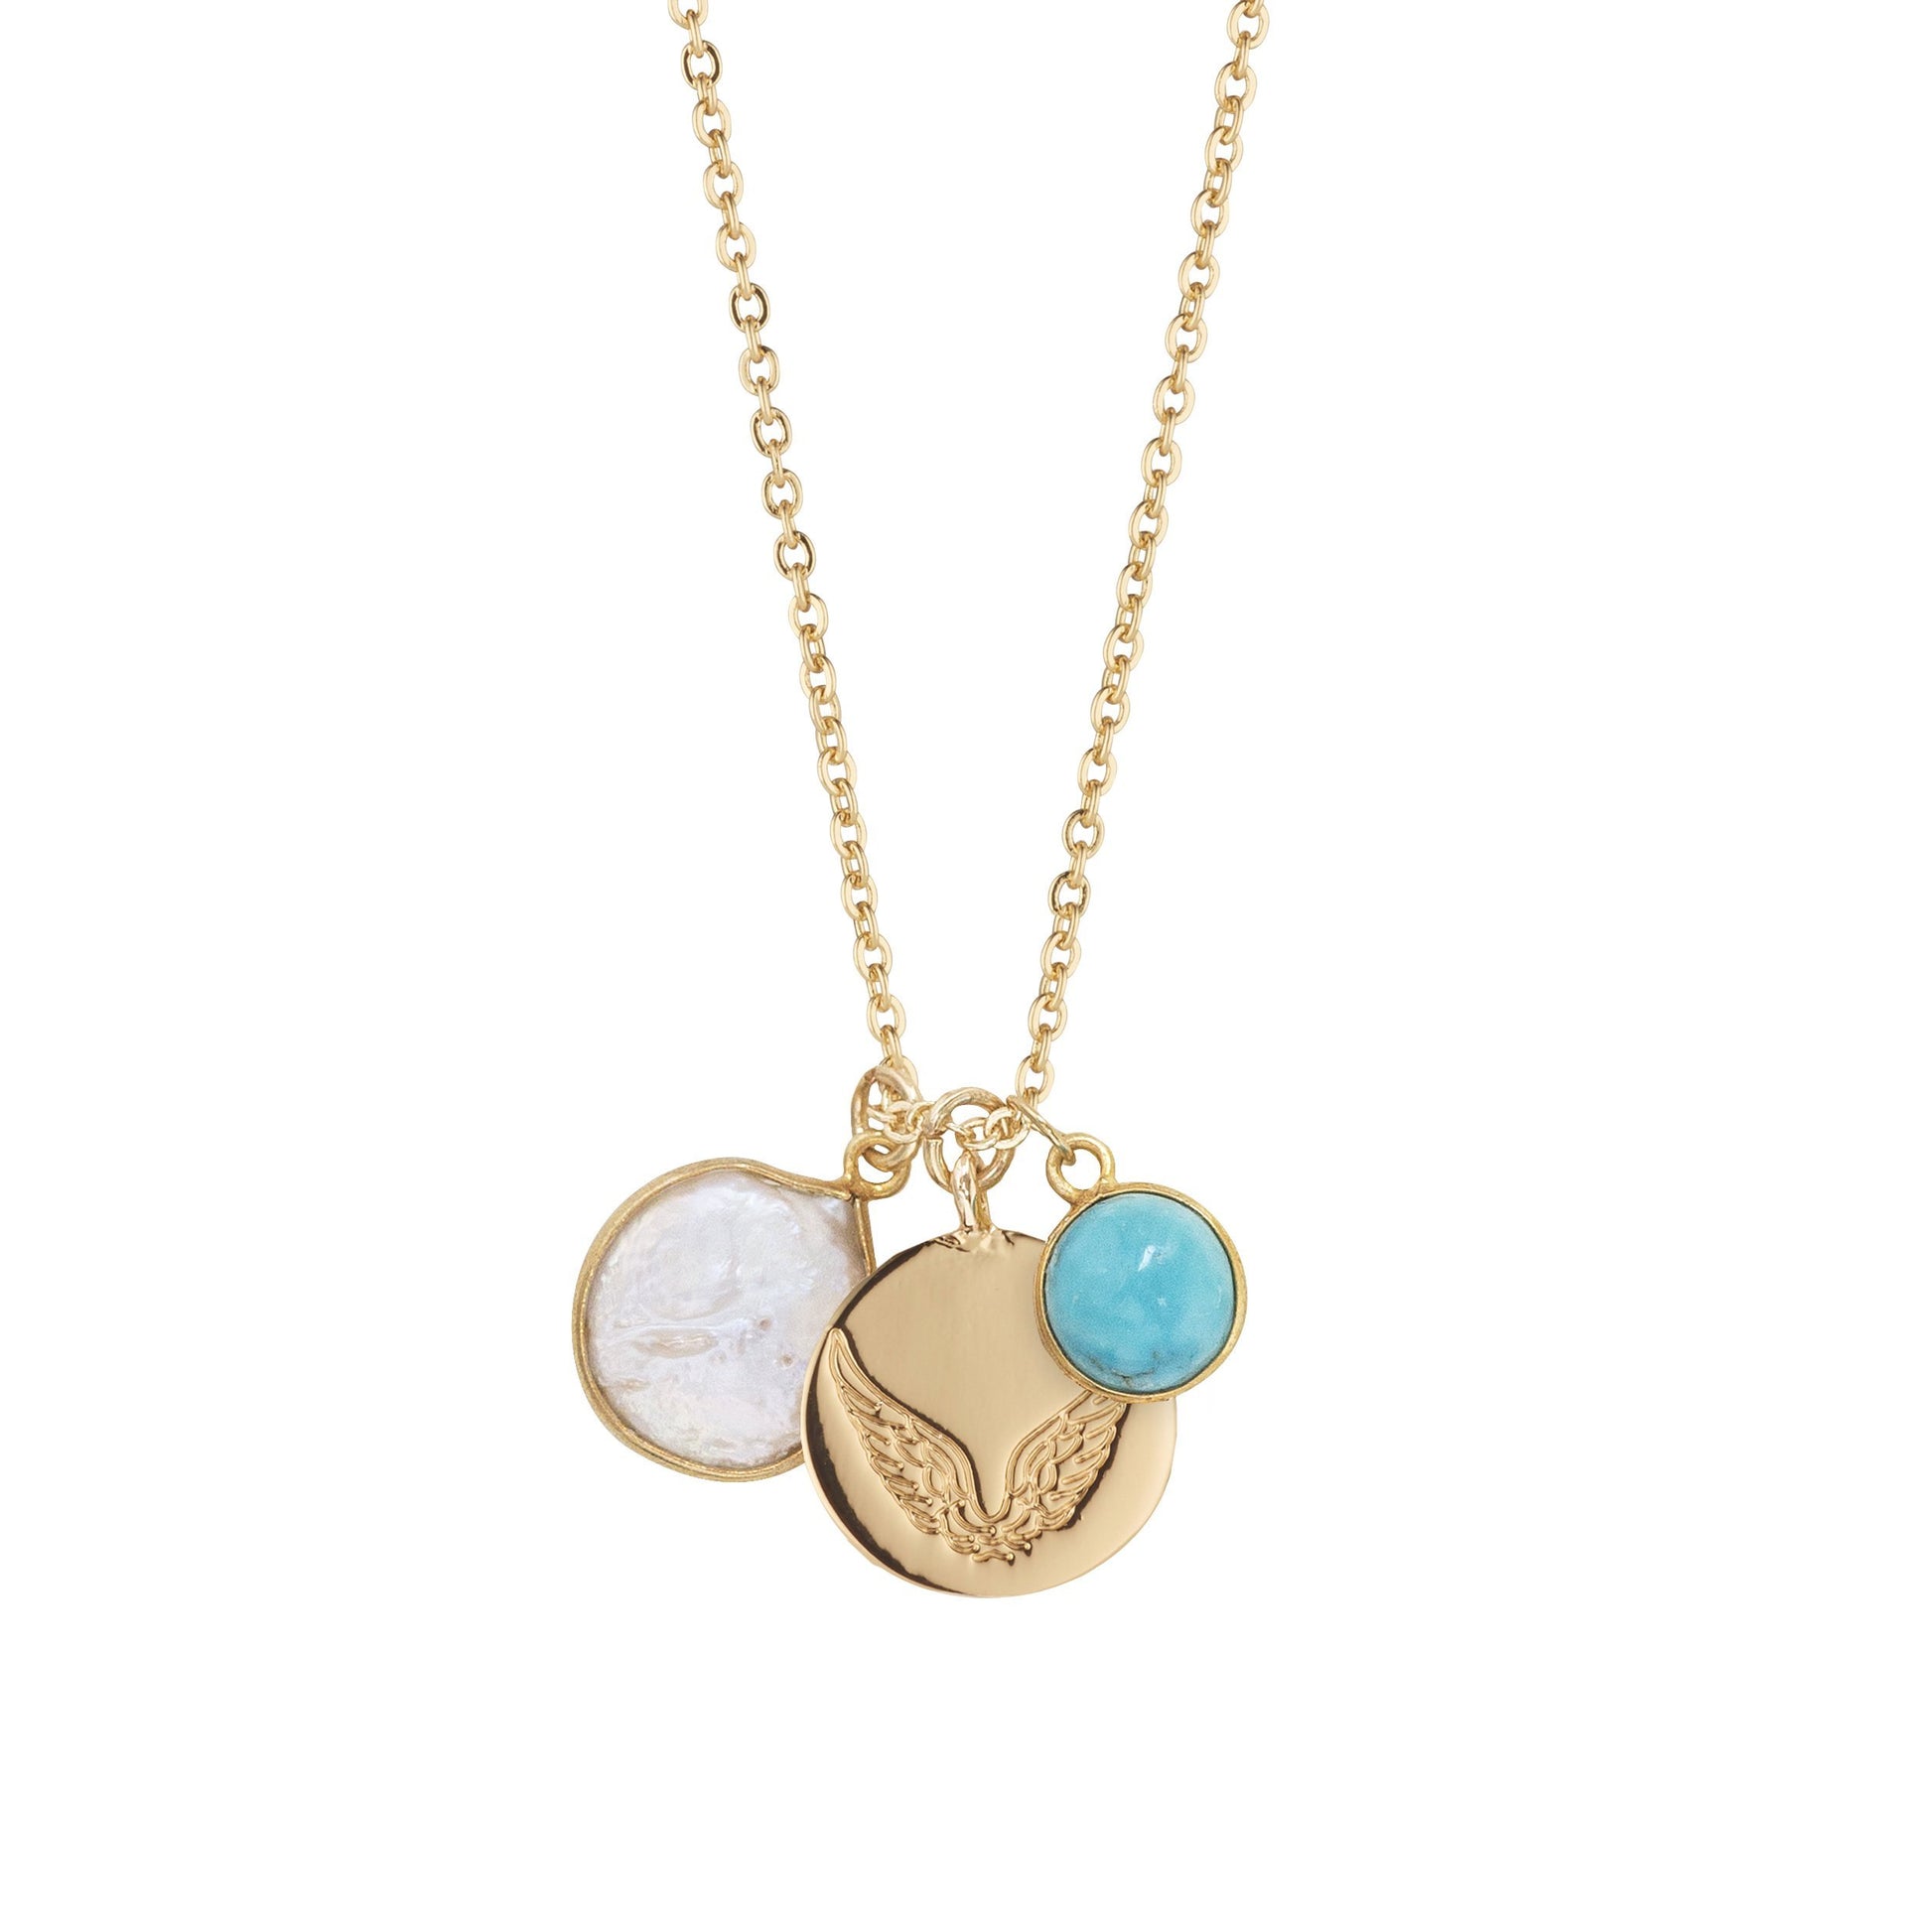 Pearl and Turquoise Necklace With Disc Charm for Peacefulness